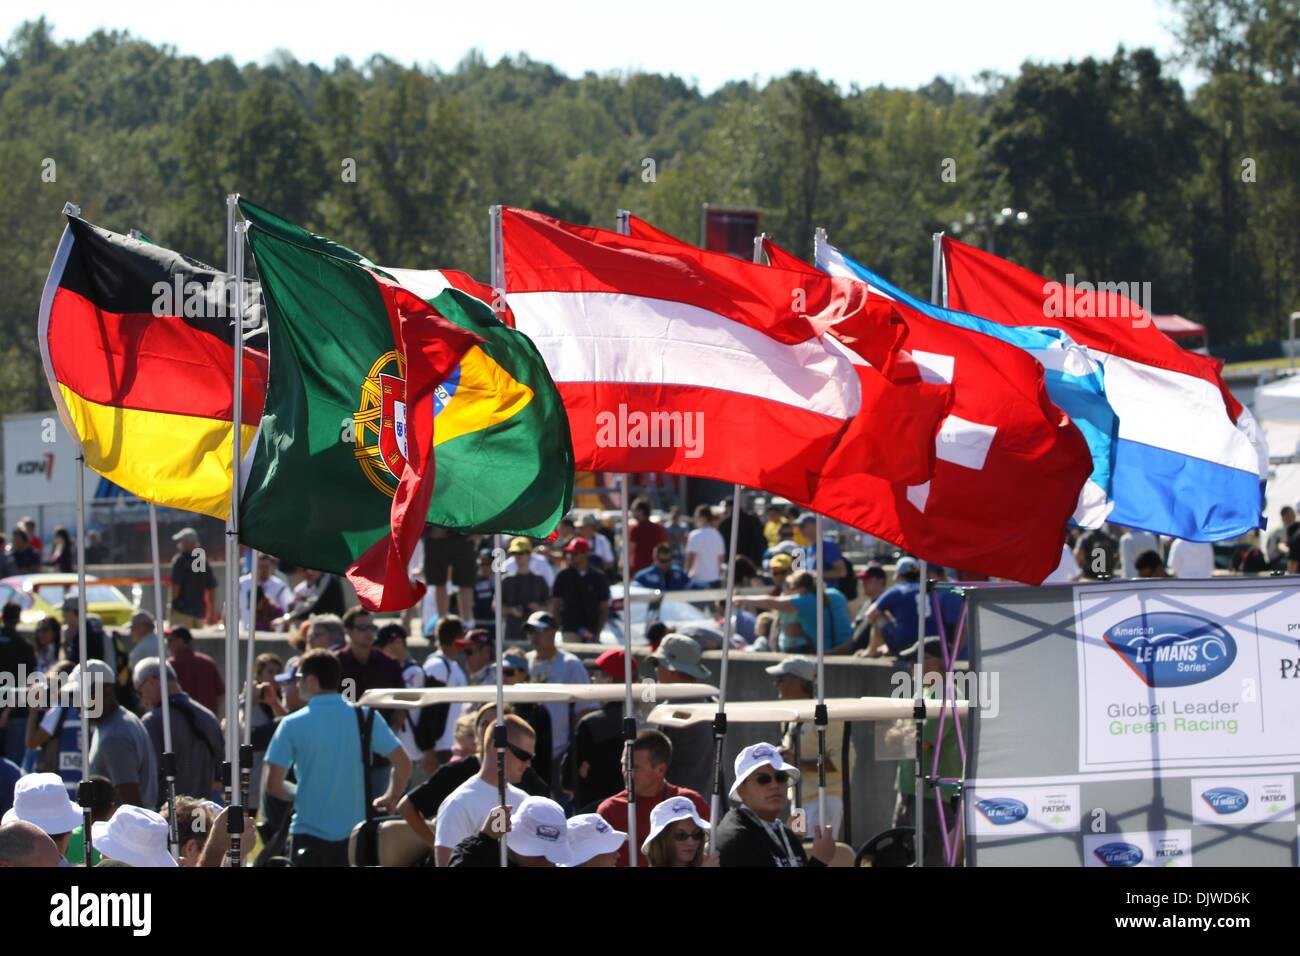 Oct. 2, 2010 - Braselton, Georgia, USA - Flags were flown during the pre-race ceremony for the various countries represented at the 13th Annual 2010 Petite Le Mans Powered By Mazda 2. (Credit Image: © Everett Davis/Southcreek Global/ZUMApress.com) Stock Photo